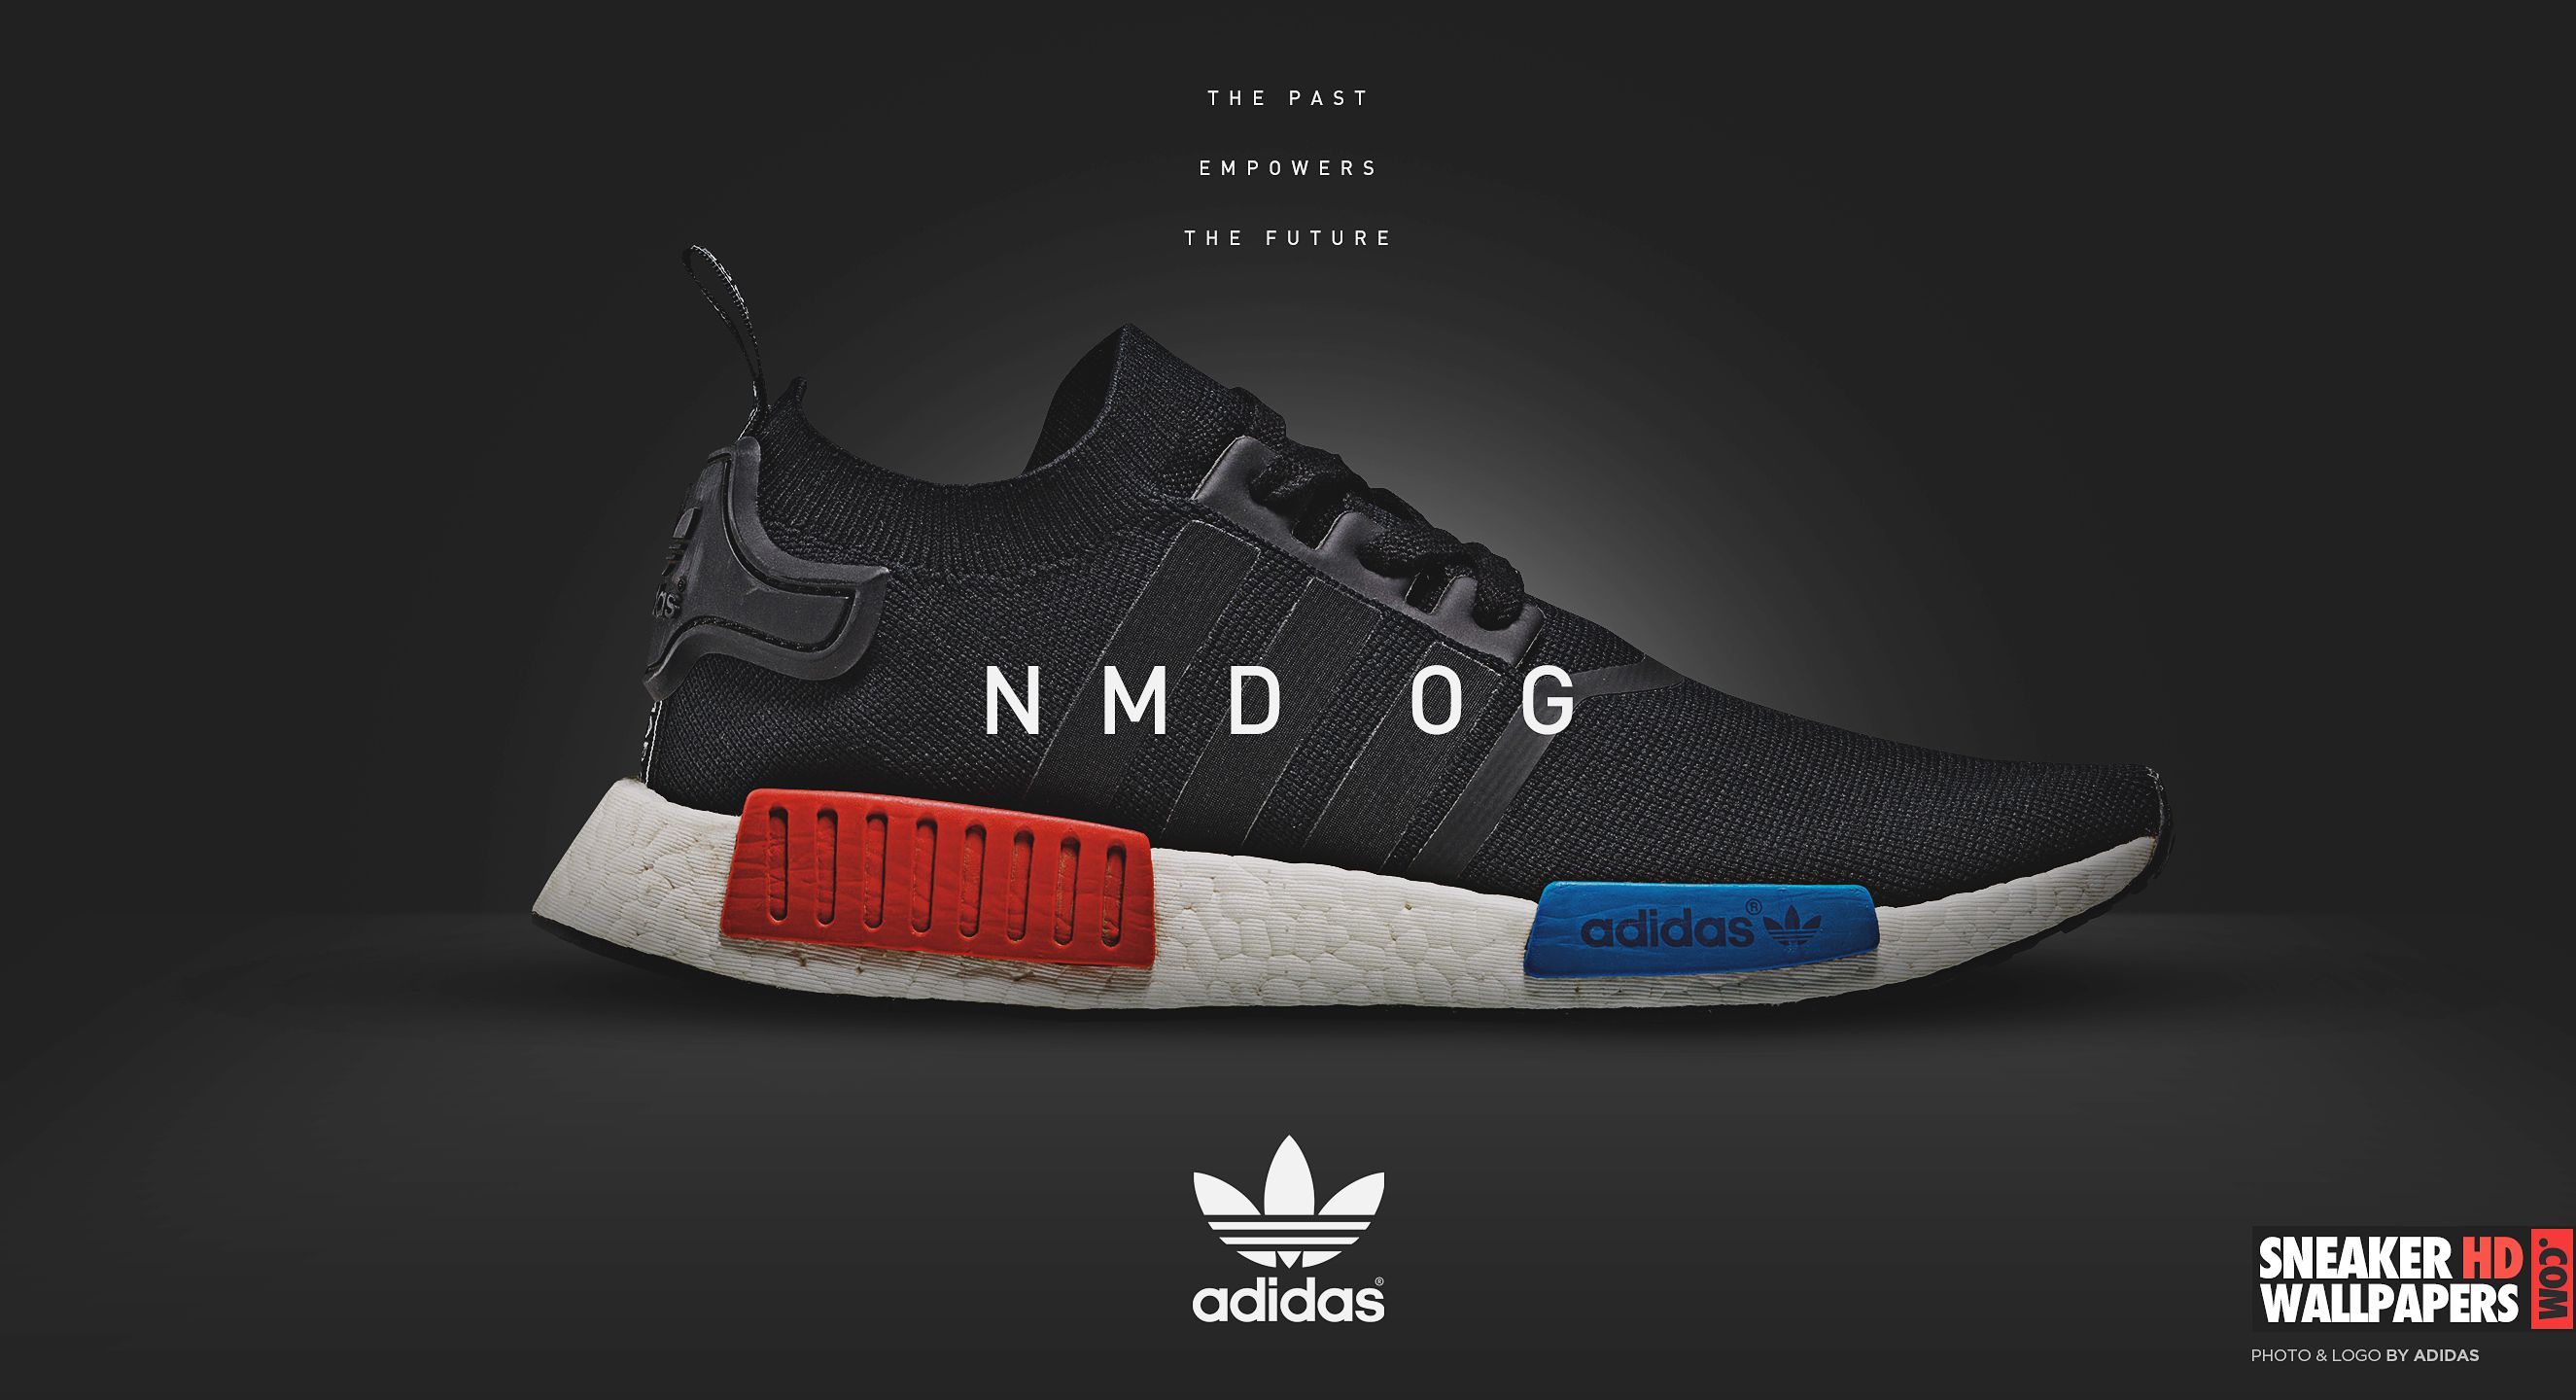 Adidas Shoes Wallpapers on WallpaperDog